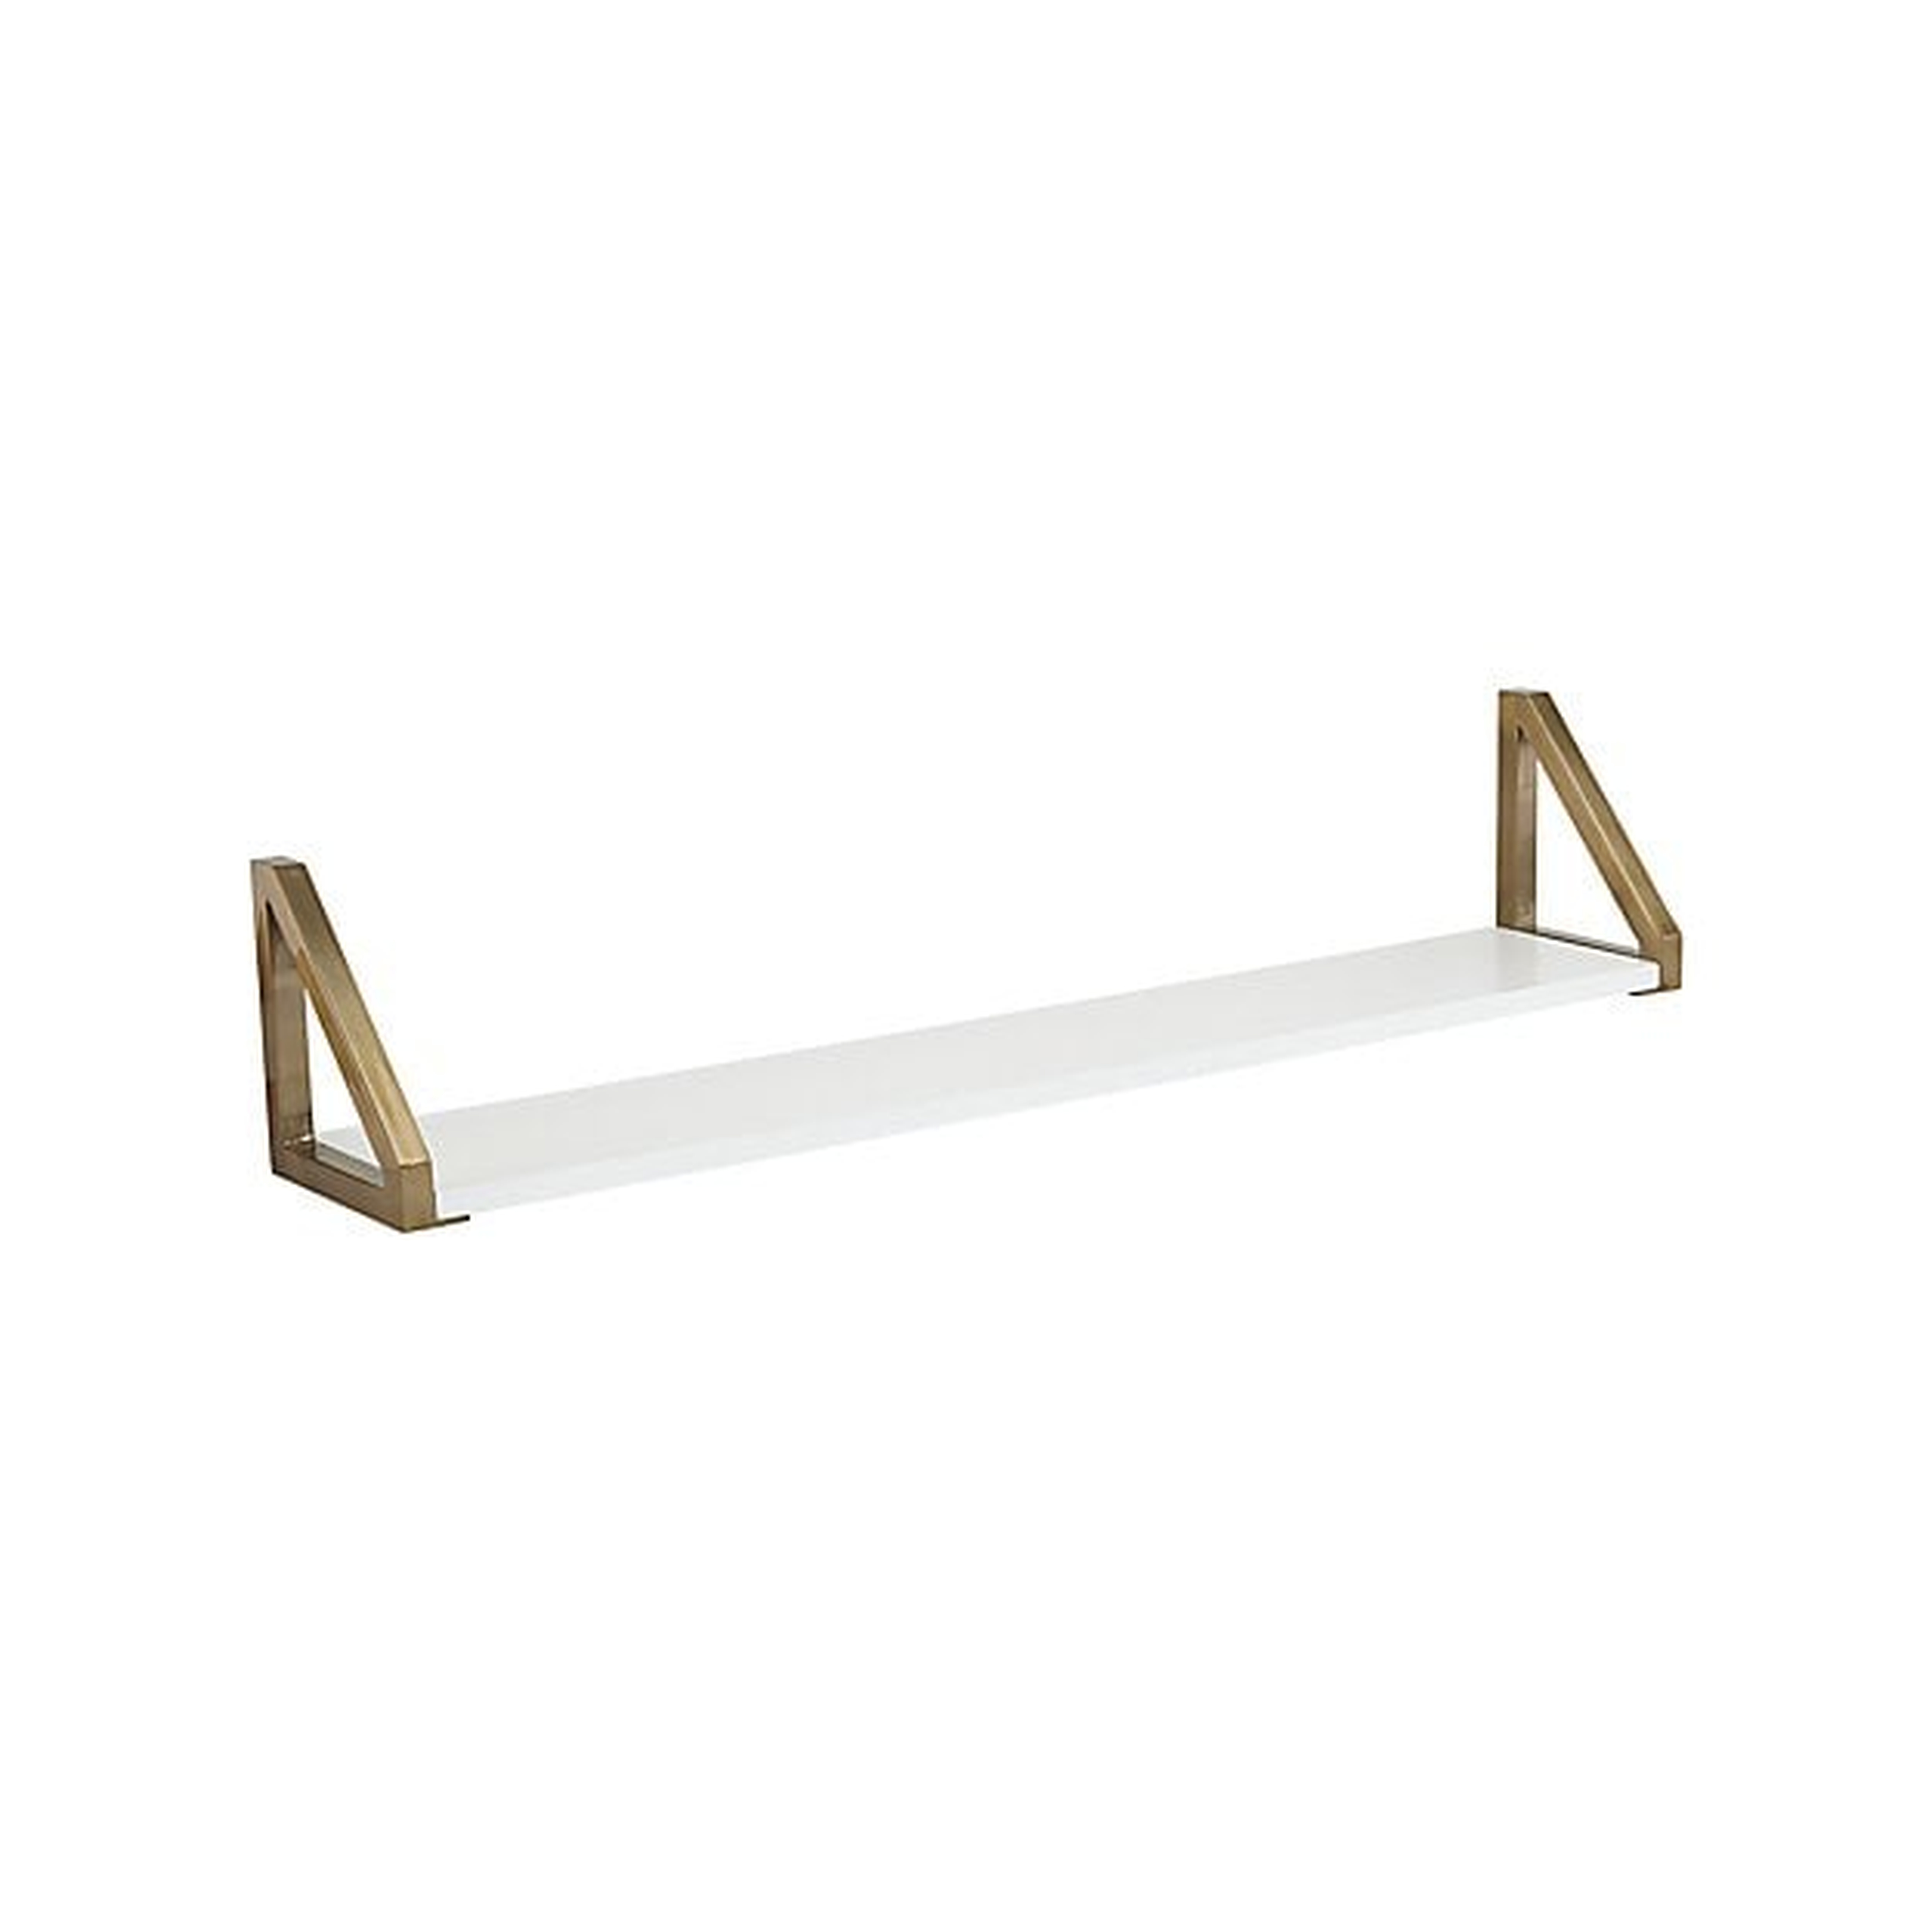 White and Gold Wall Shelf - Crate and Barrel